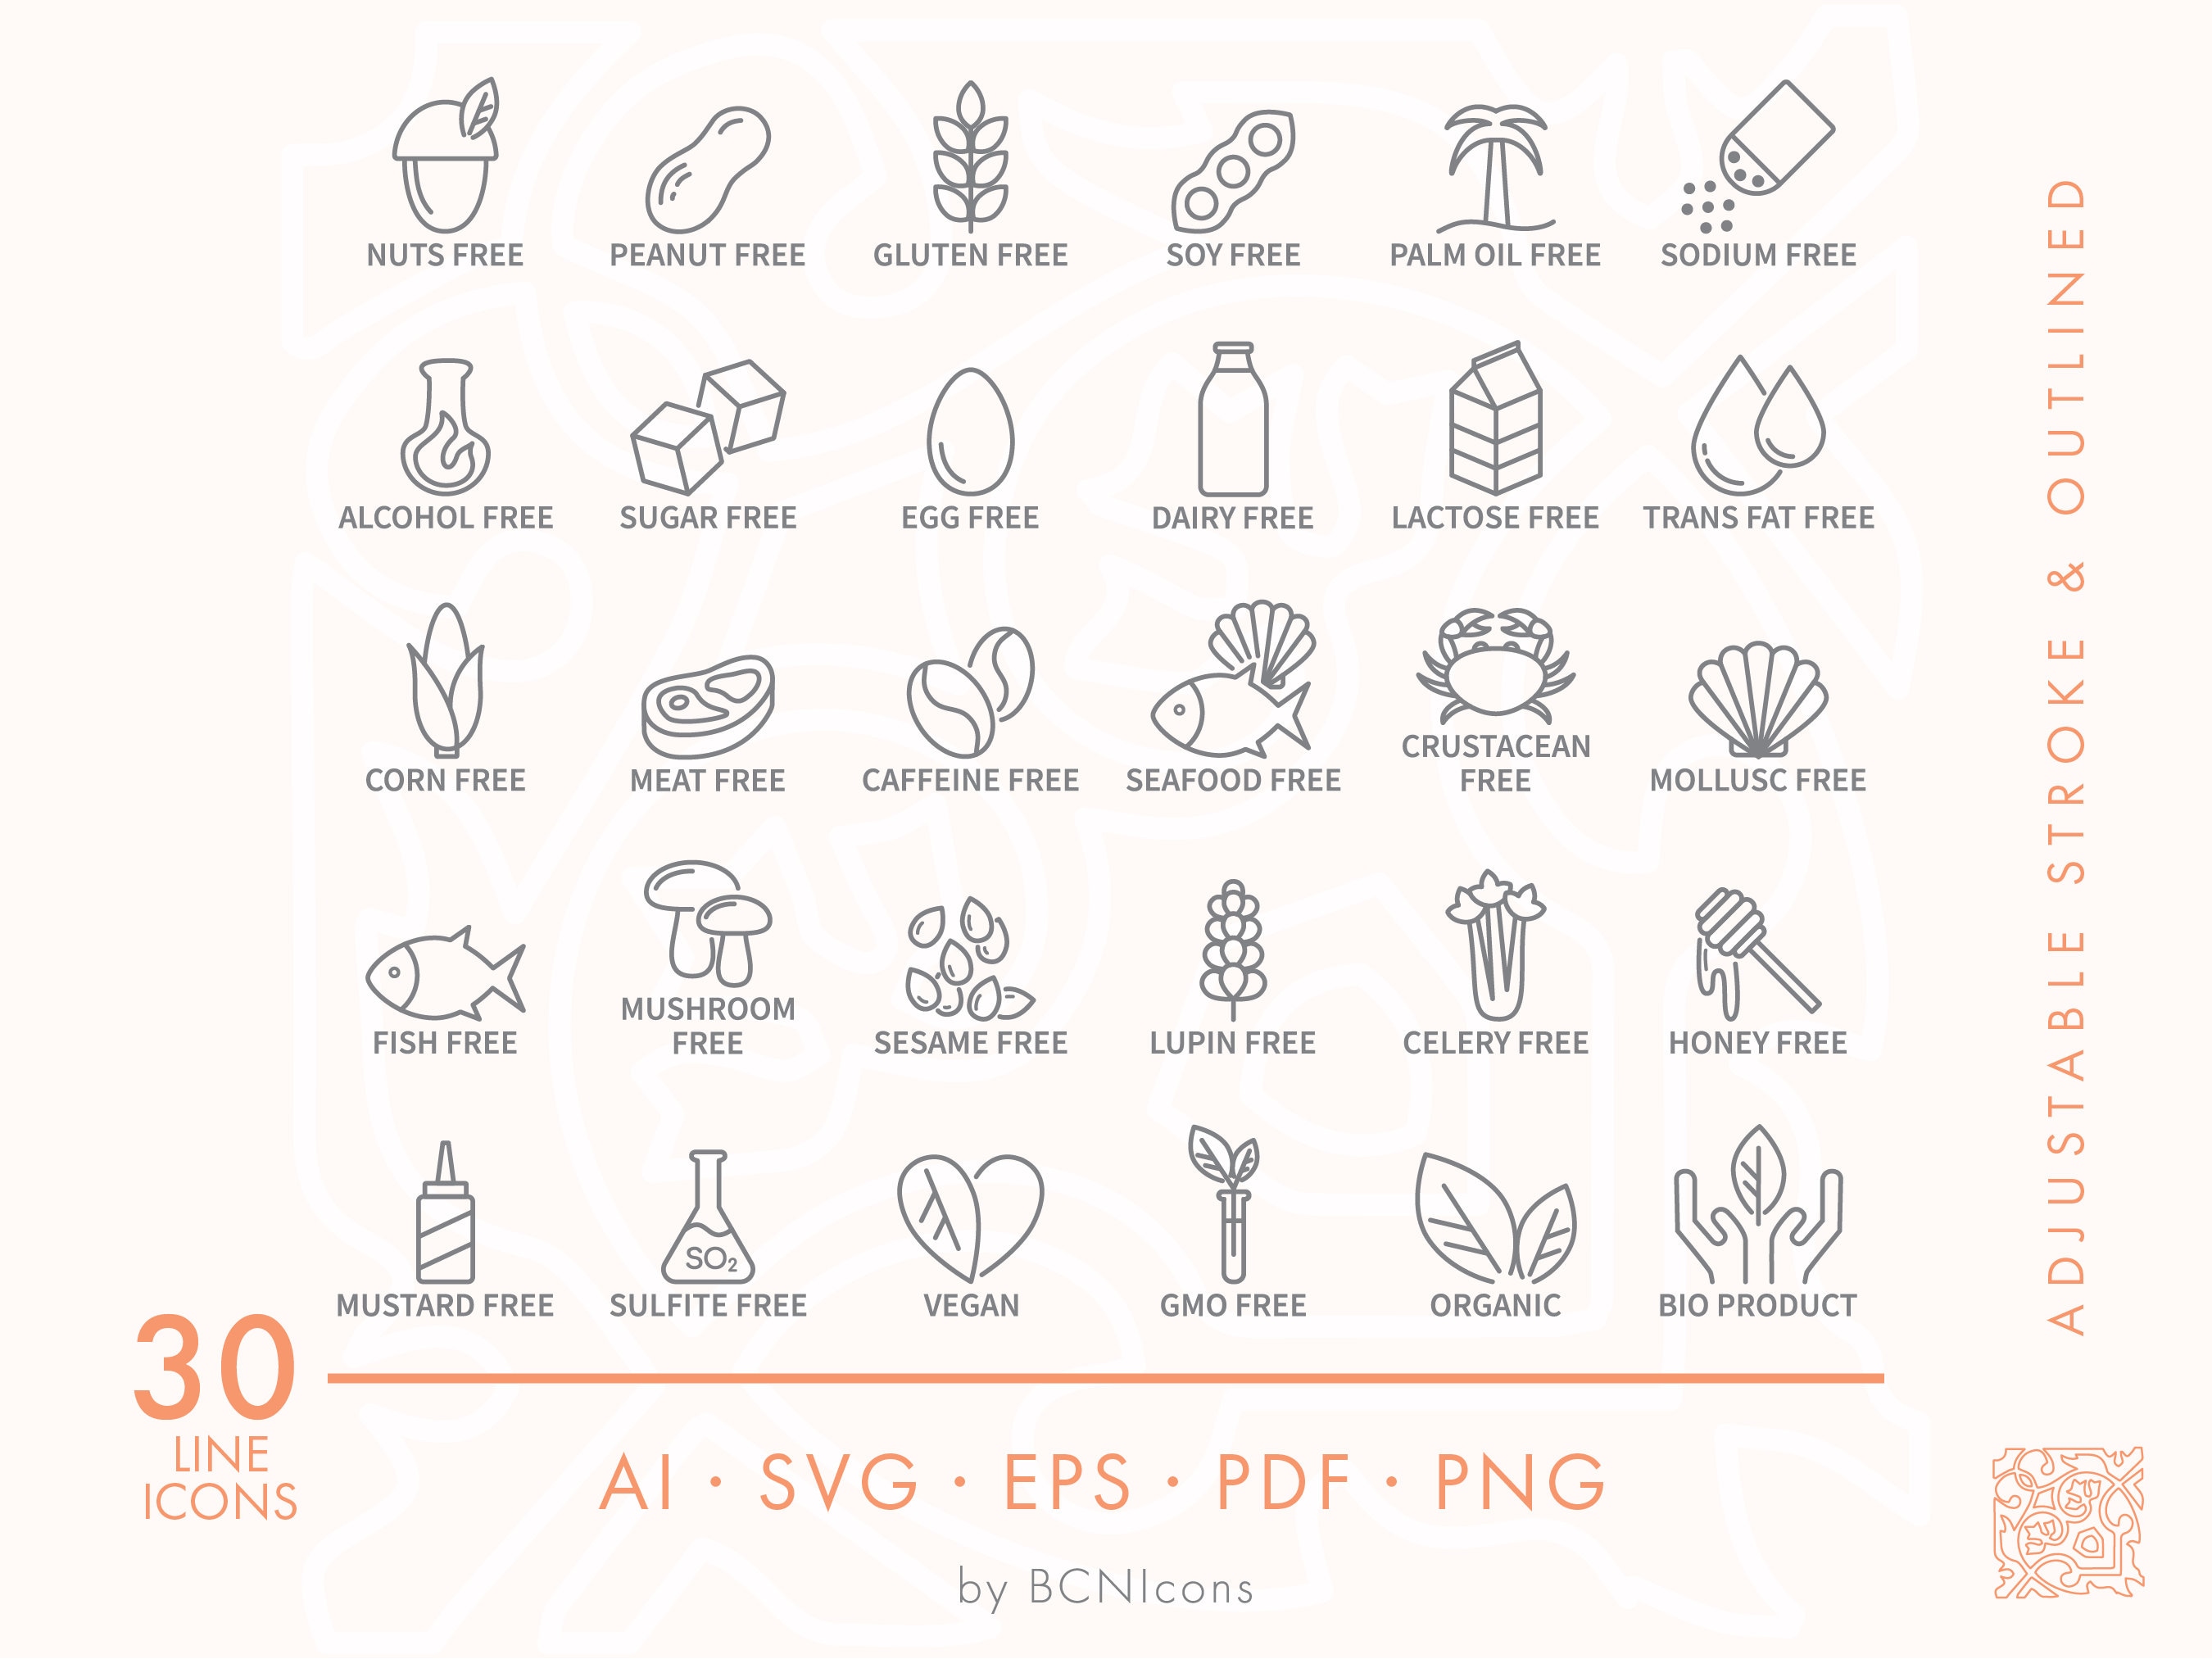 Kick-Out Icons - Free SVG & PNG Kick-Out Images - Noun Project